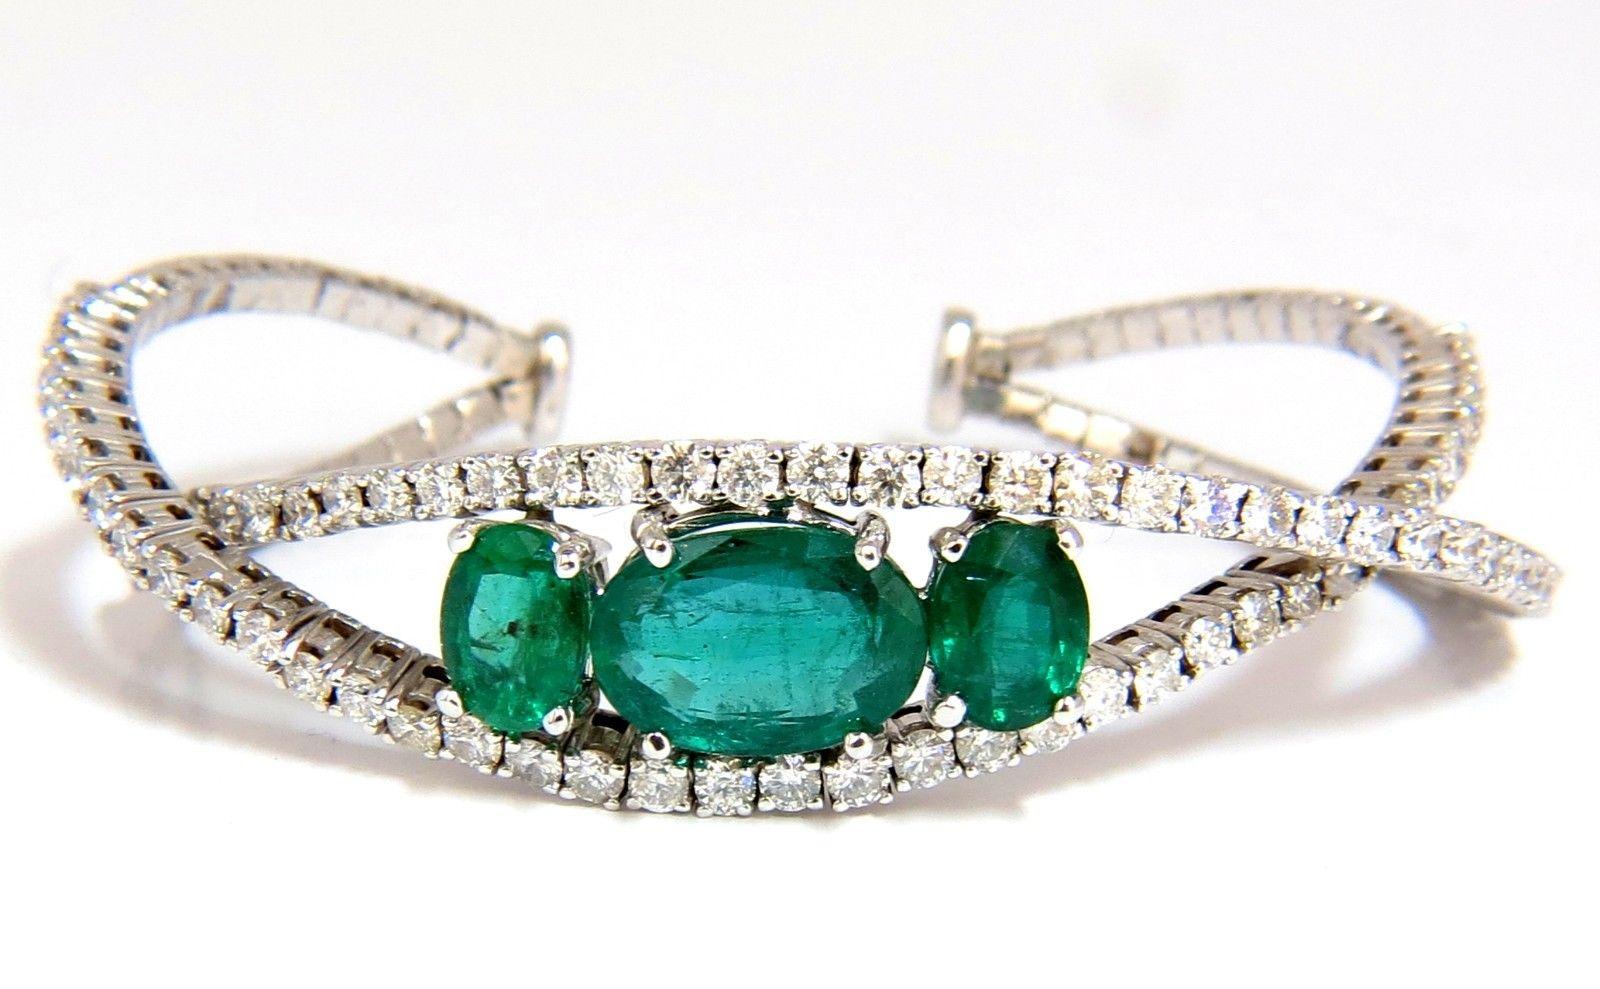 Crossover Bangle Bracelet

8.00ct. Natural Emeralds (3)

Green, Transparent & oval cut.

5.00ct. Center: 12.8 X 8.6mm

3.00ct. (2) Smaller: 7.7 X 5.8mm

3.75ct. diamonds:

Rounds, G color Vs-2 clarity.

14kt. white gold 

21.5 Grams.

.56 inch